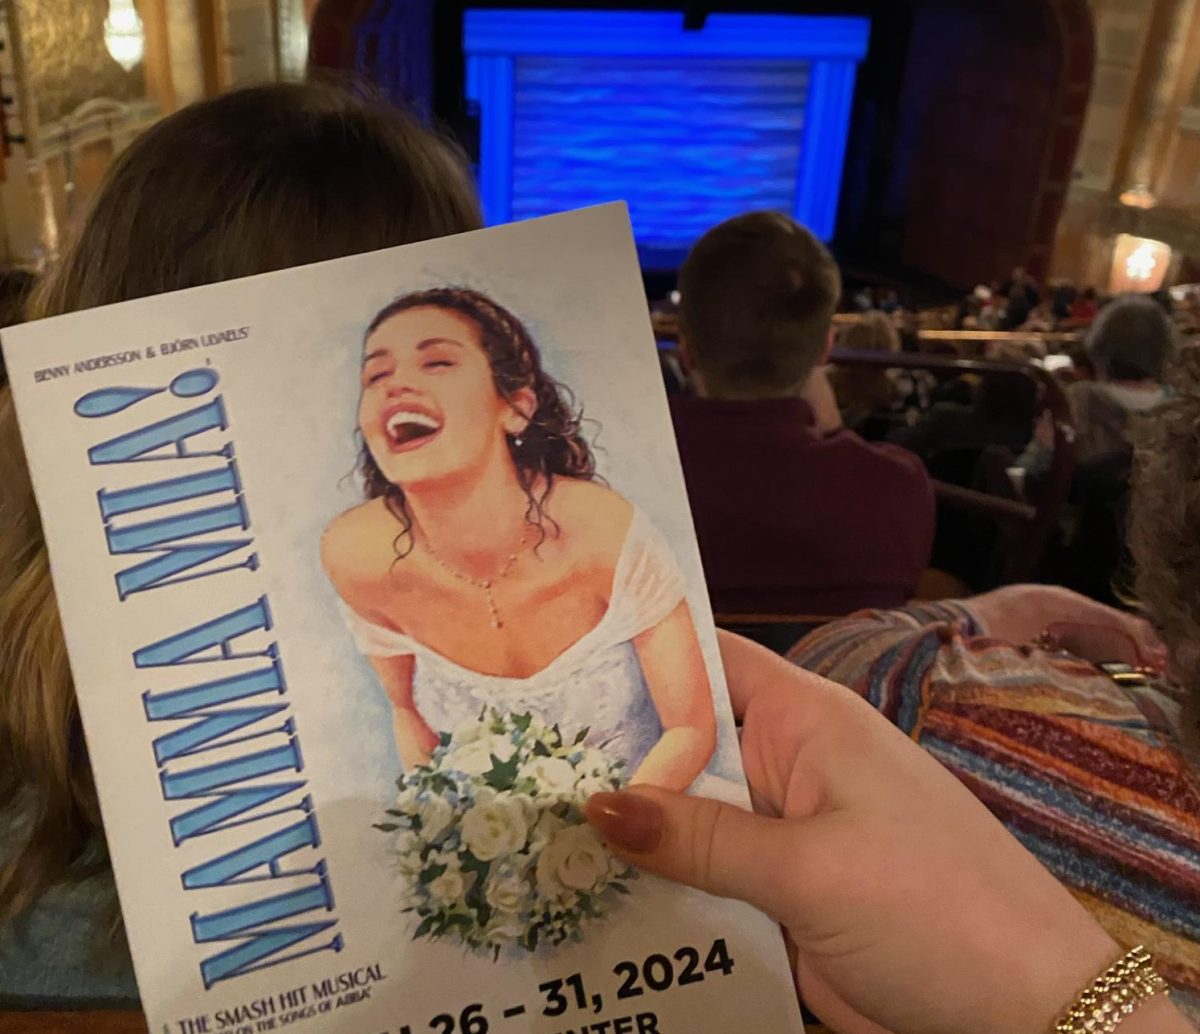 Mamma Mia! toured in Pittsburgh from March 26 to 31 at the Benedum Theater.